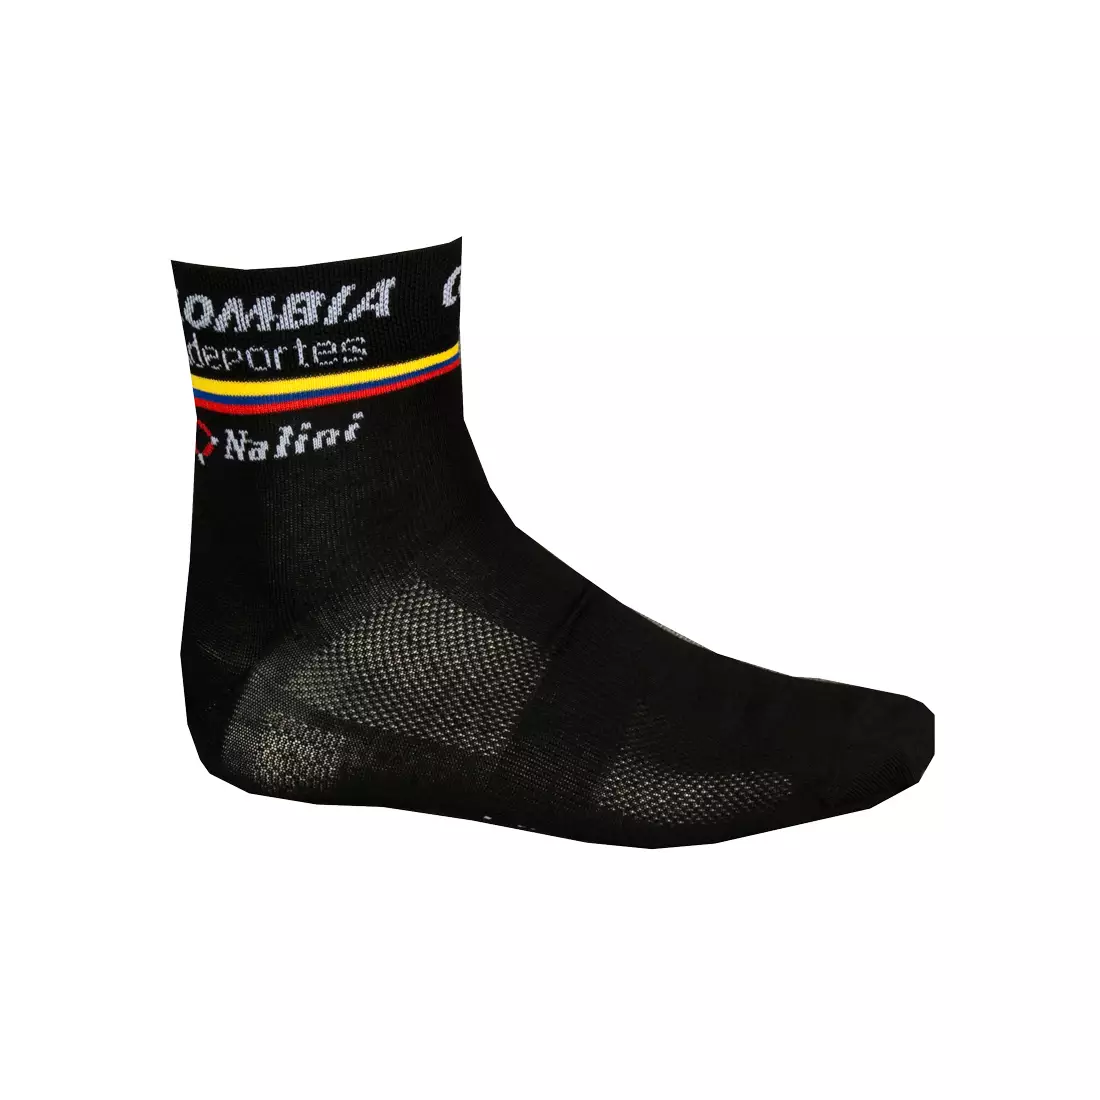 COLOMBIA 2015 cycling socks